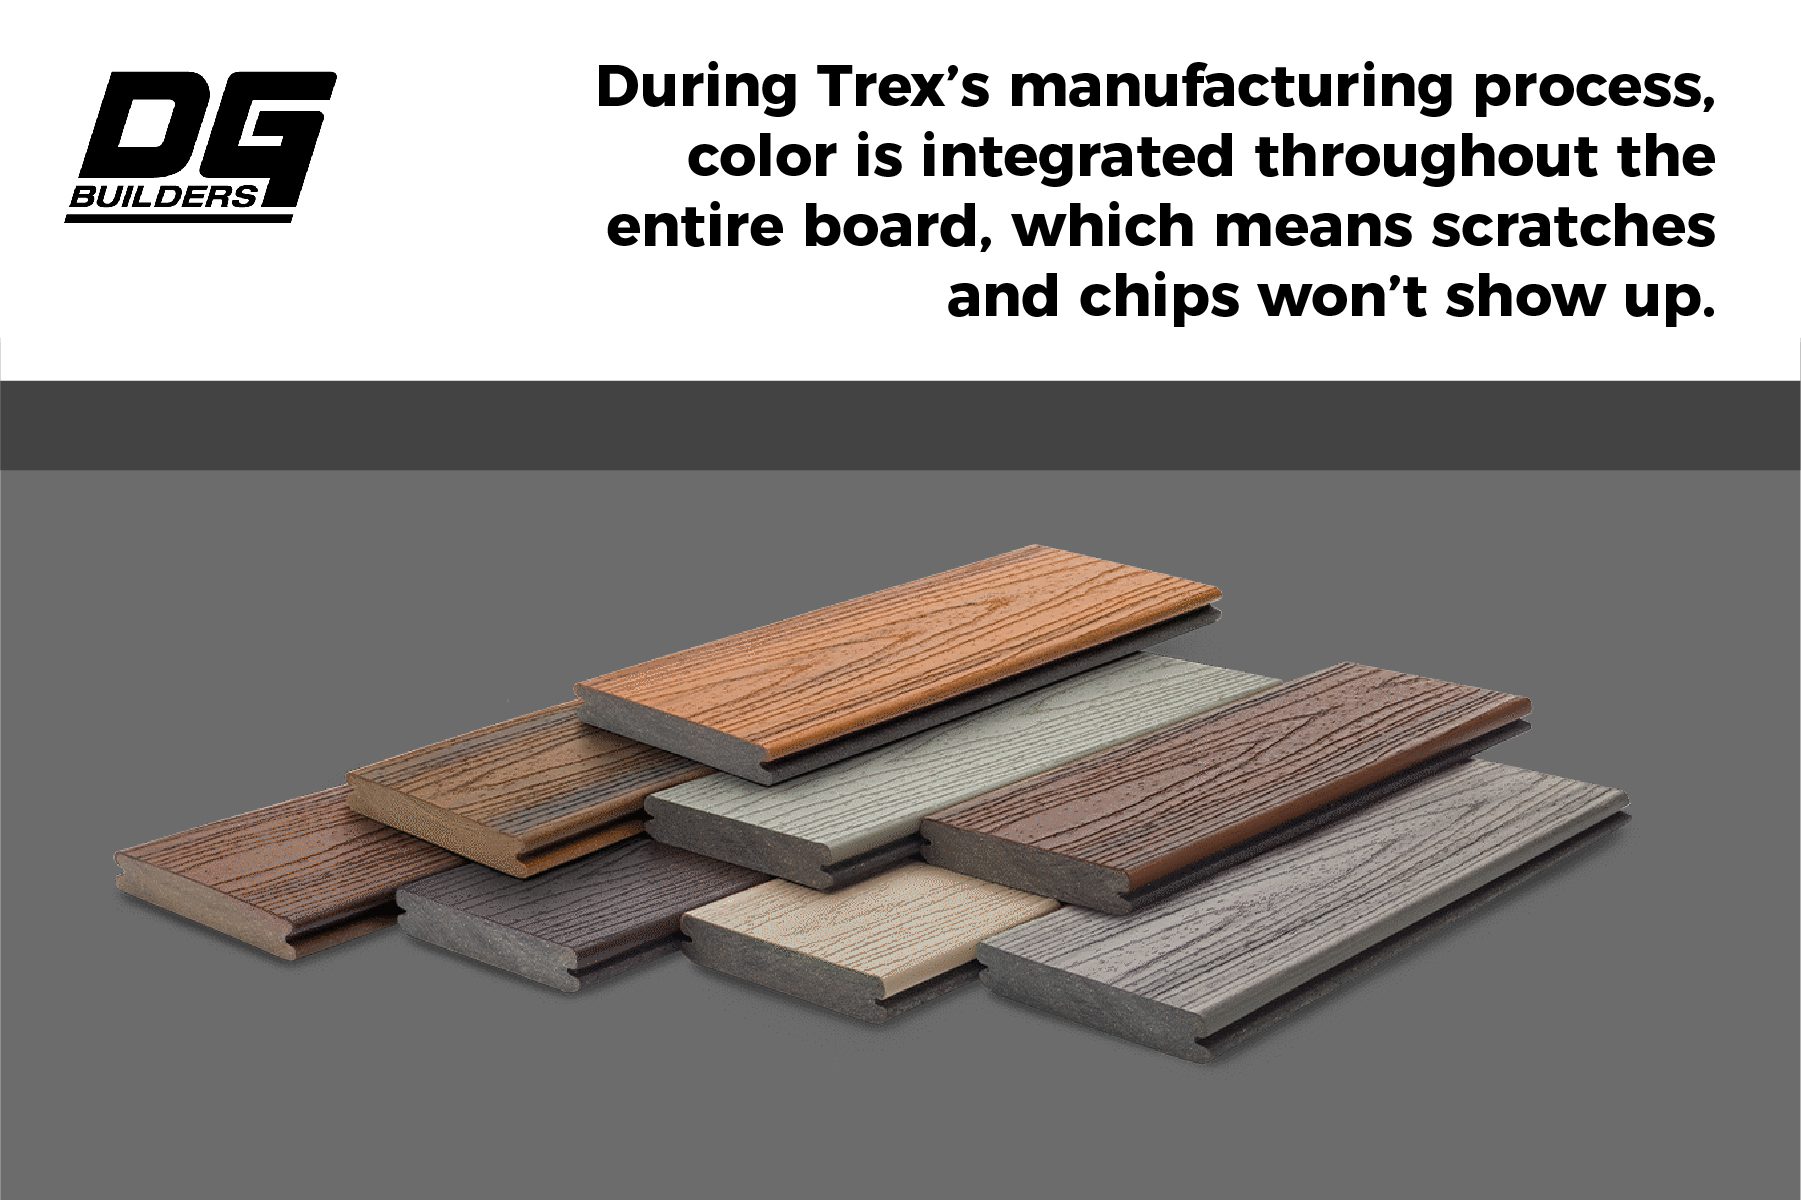 Trex composite decking is colored the whole way through